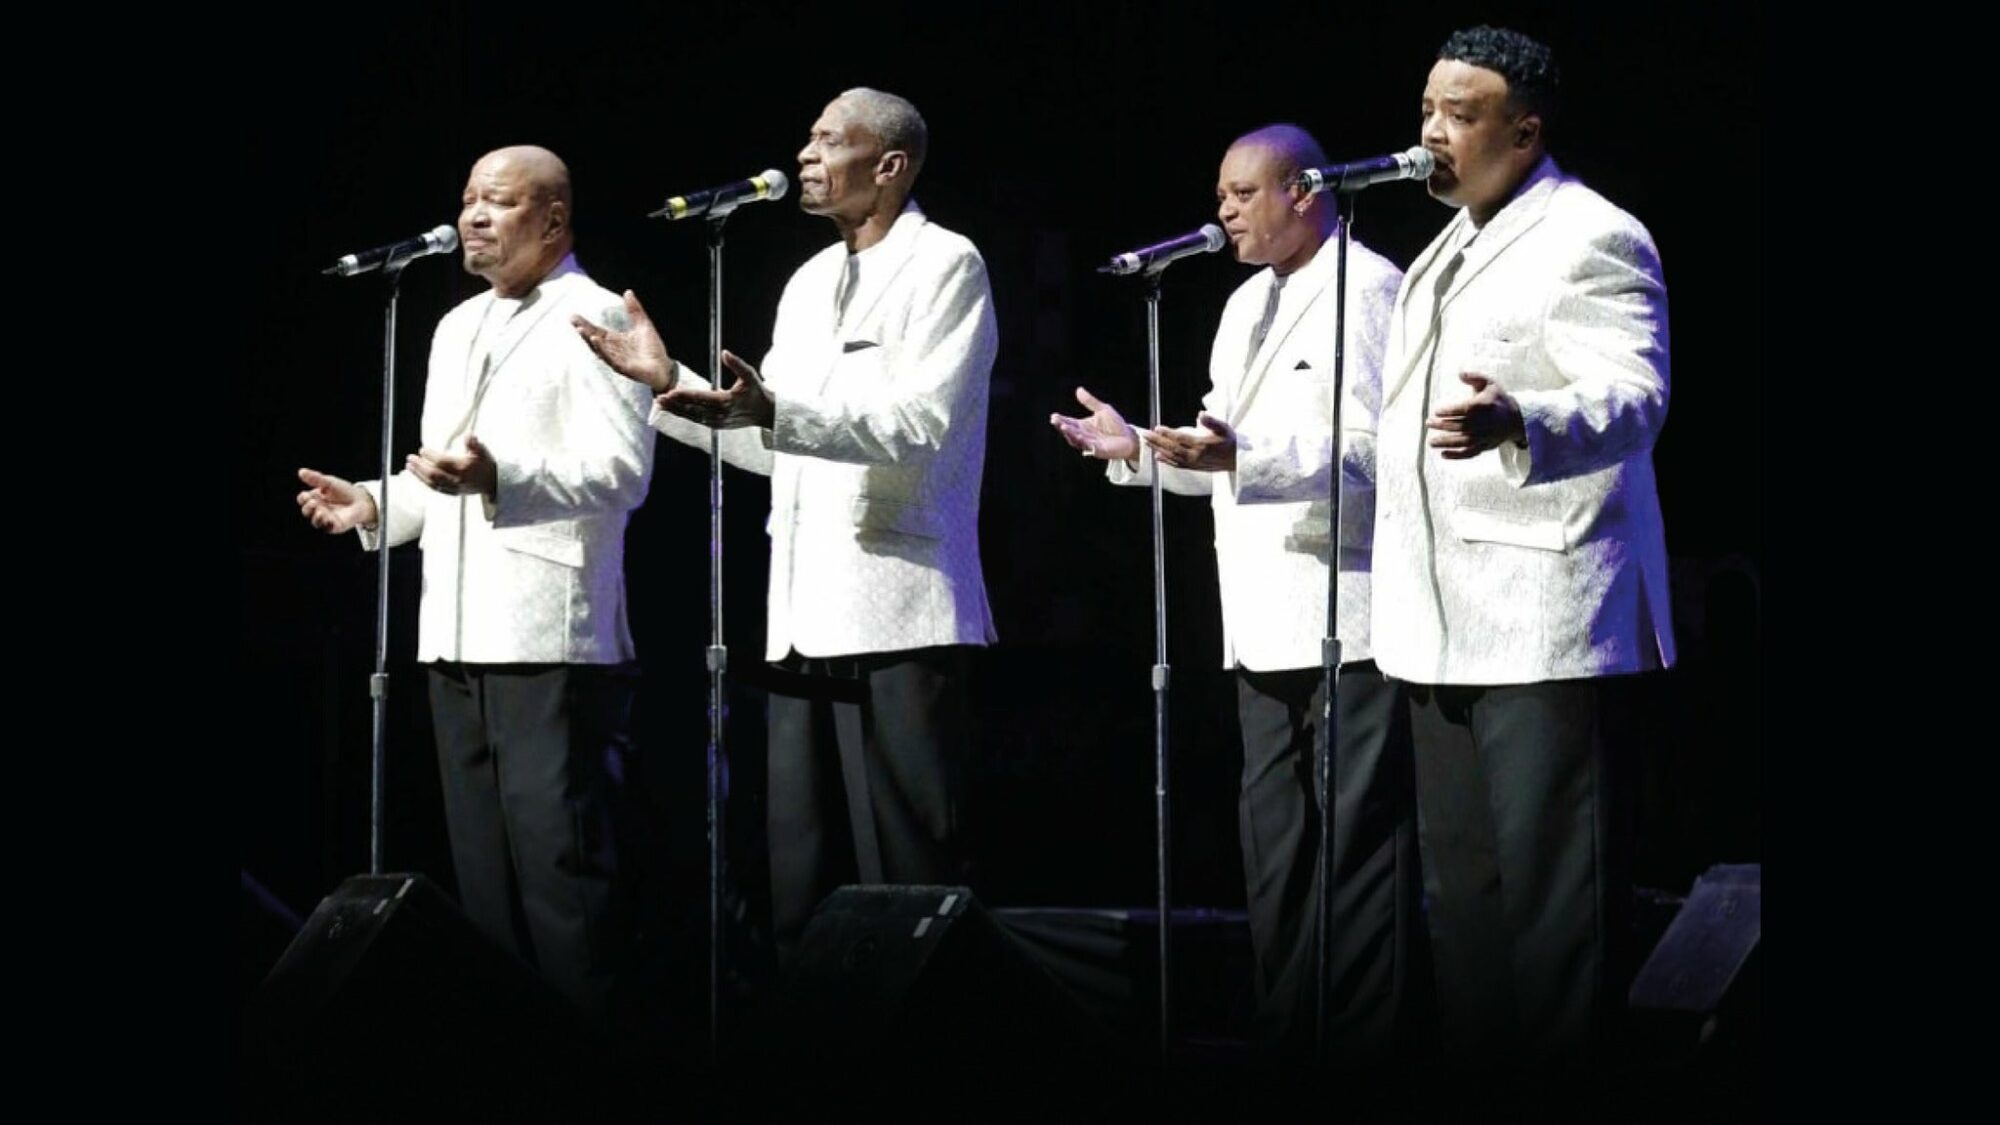 Image name The Stylistics at Sheffield City Hall Oval Hall Sheffield the 31 image from the post Events in Yorkshire.com.